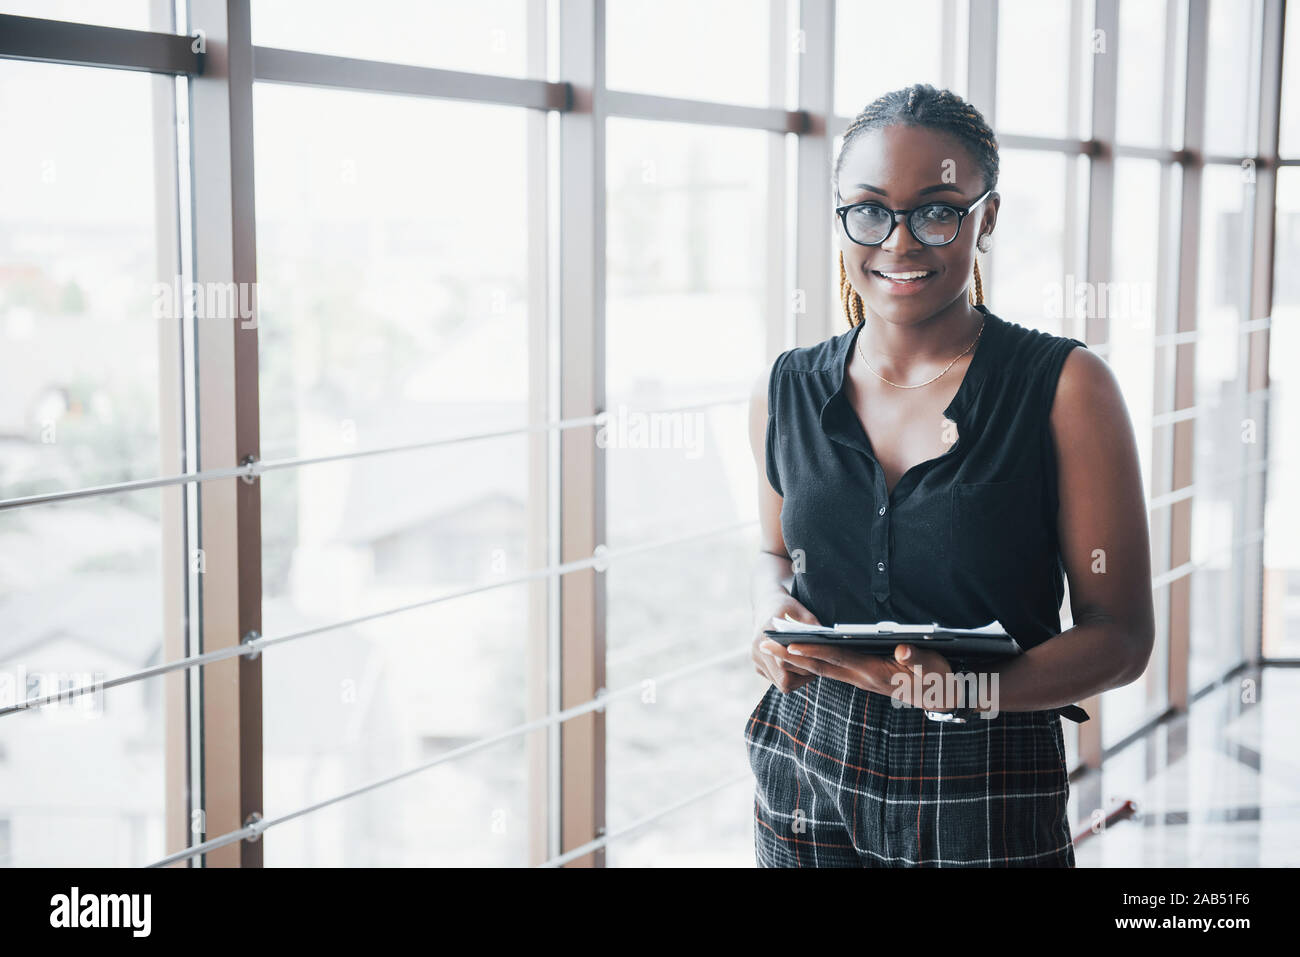 A thoughtful African American business woman wearing glasses holding documents Stock Photo